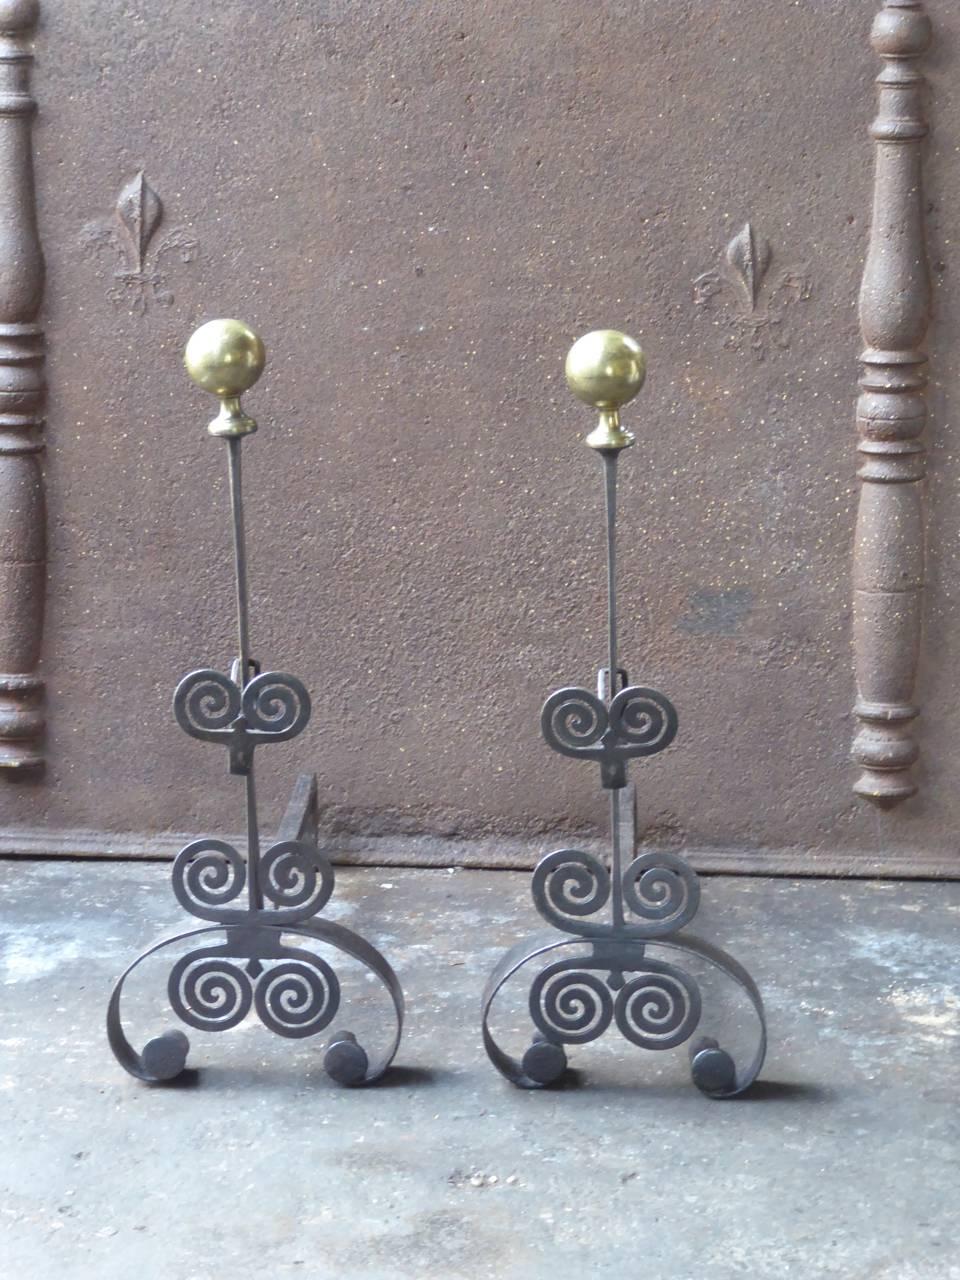 19th century French Napoleon III andirons made of wrought iron and brass.